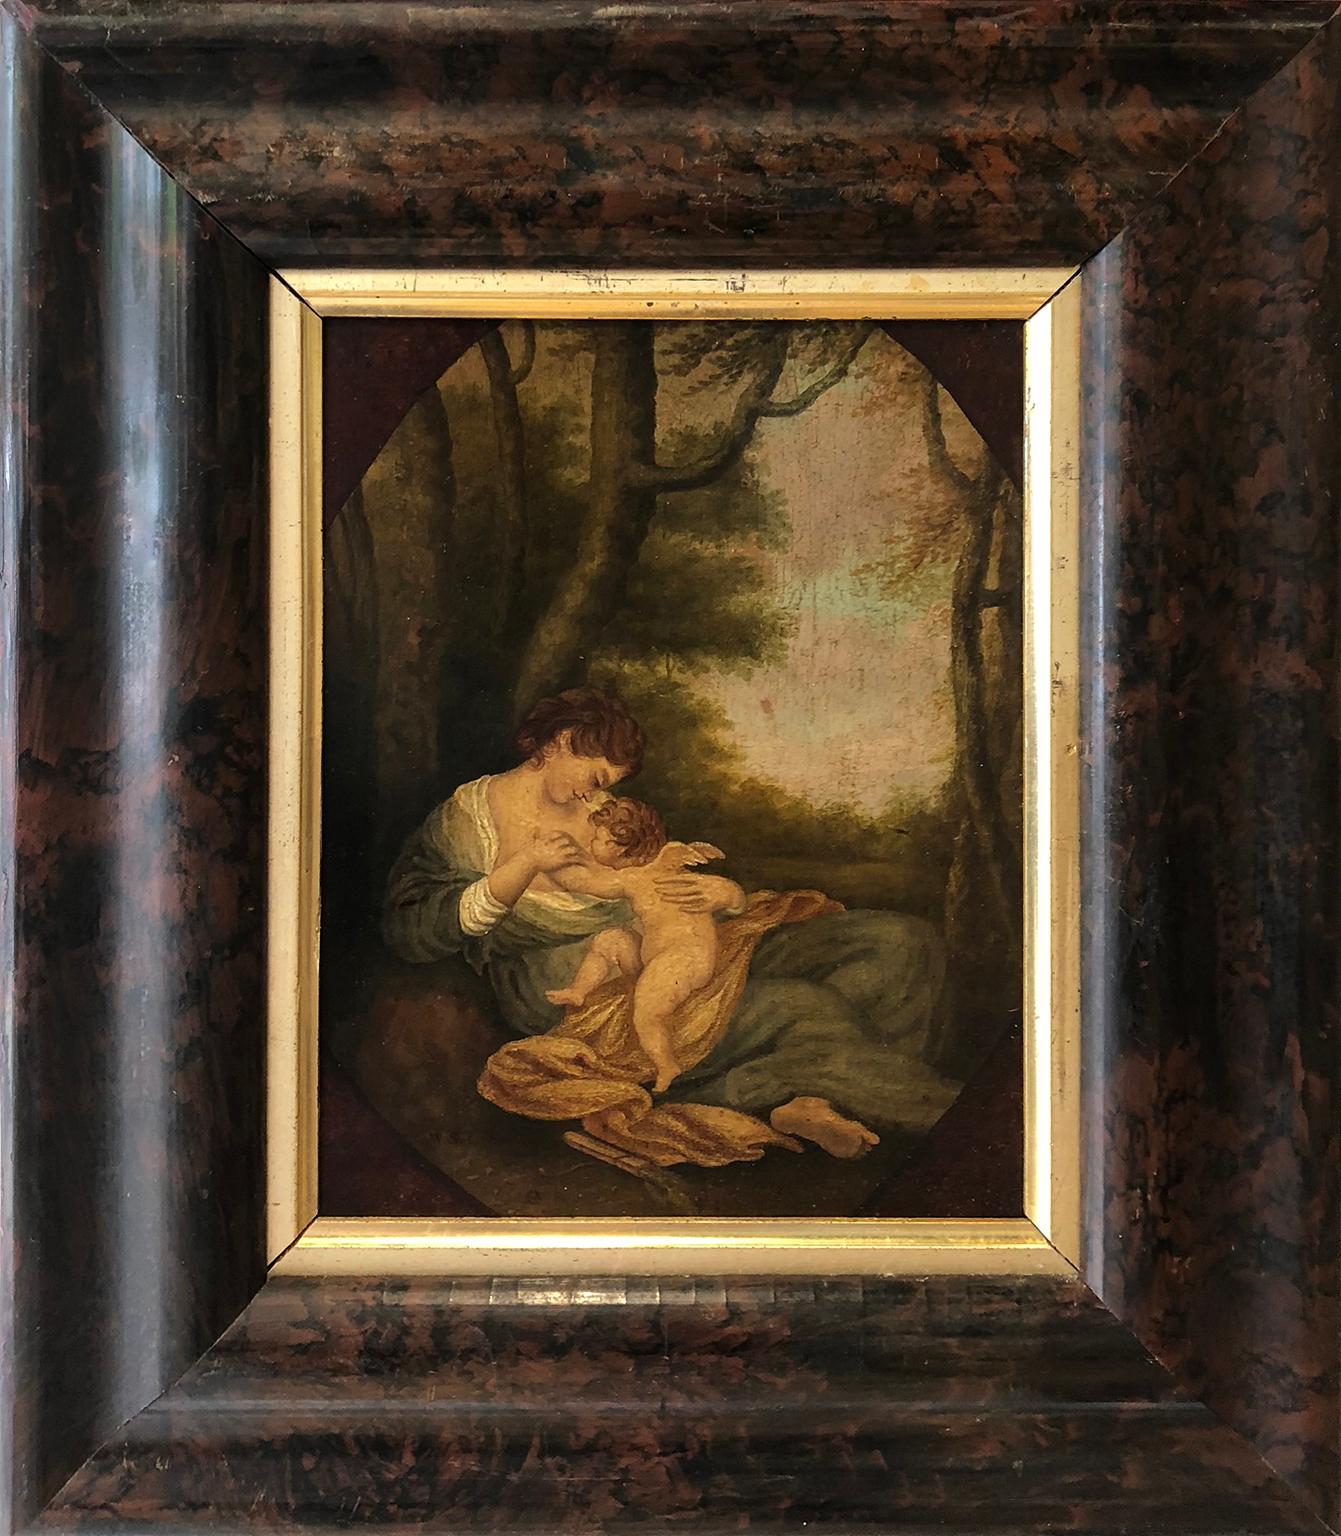 Venus and Cupid Circa Early 19th Century - Oil on panel  - Painting by Unknown